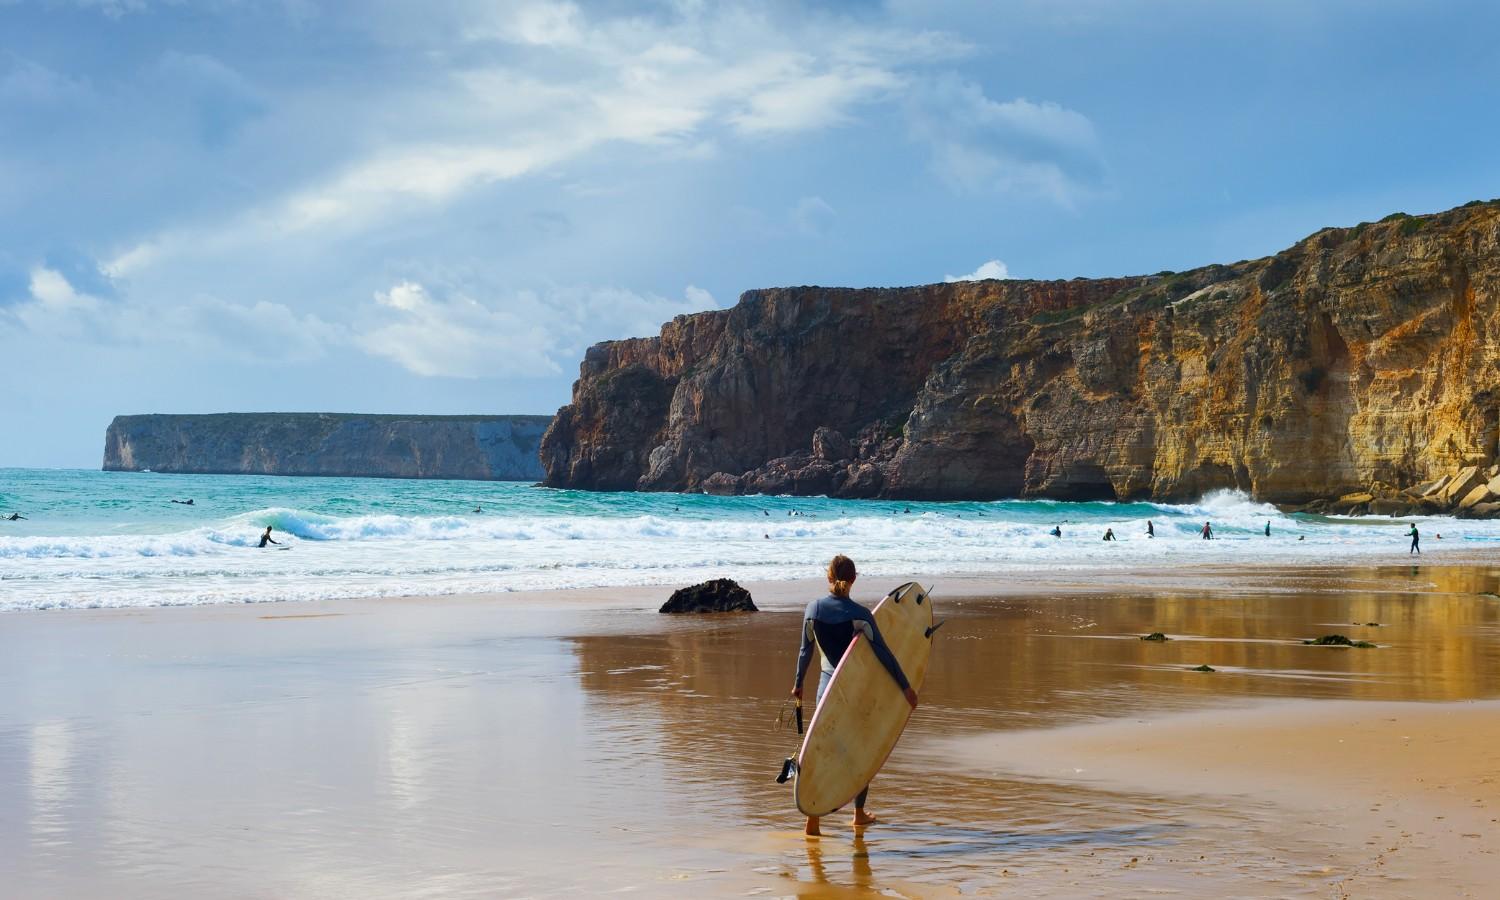 Will it be surf or turf in Alentejo on our Day 2 of 7 Ways to Spend 7 Days in Portugal?